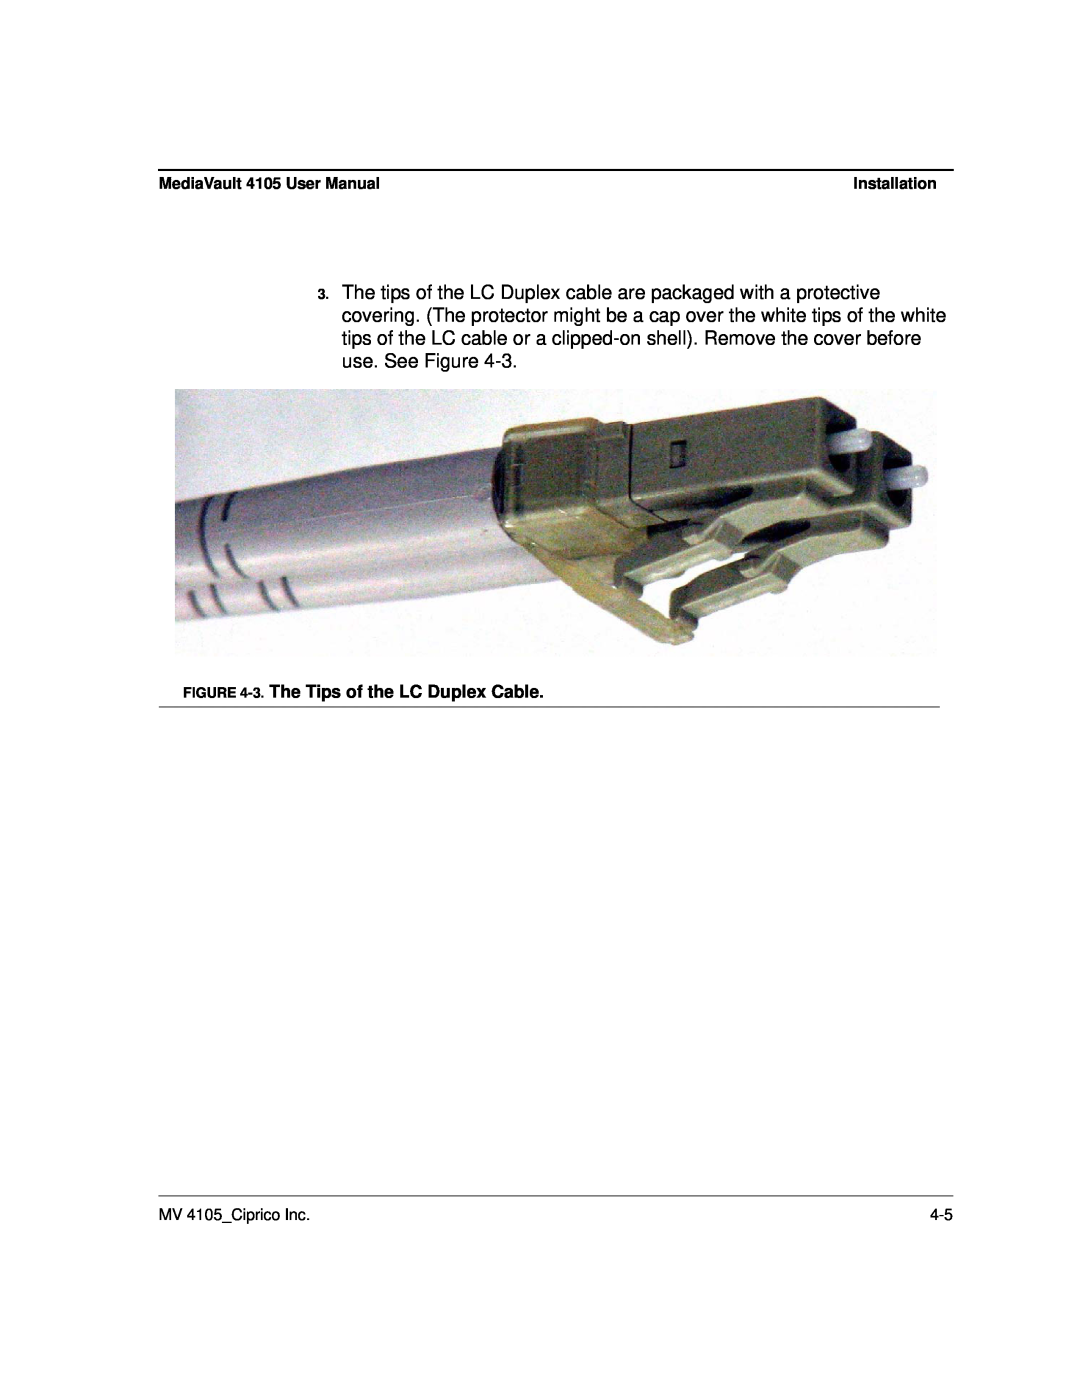 Ciprico 4105 Series user manual 3. The Tips of the LC Duplex Cable 